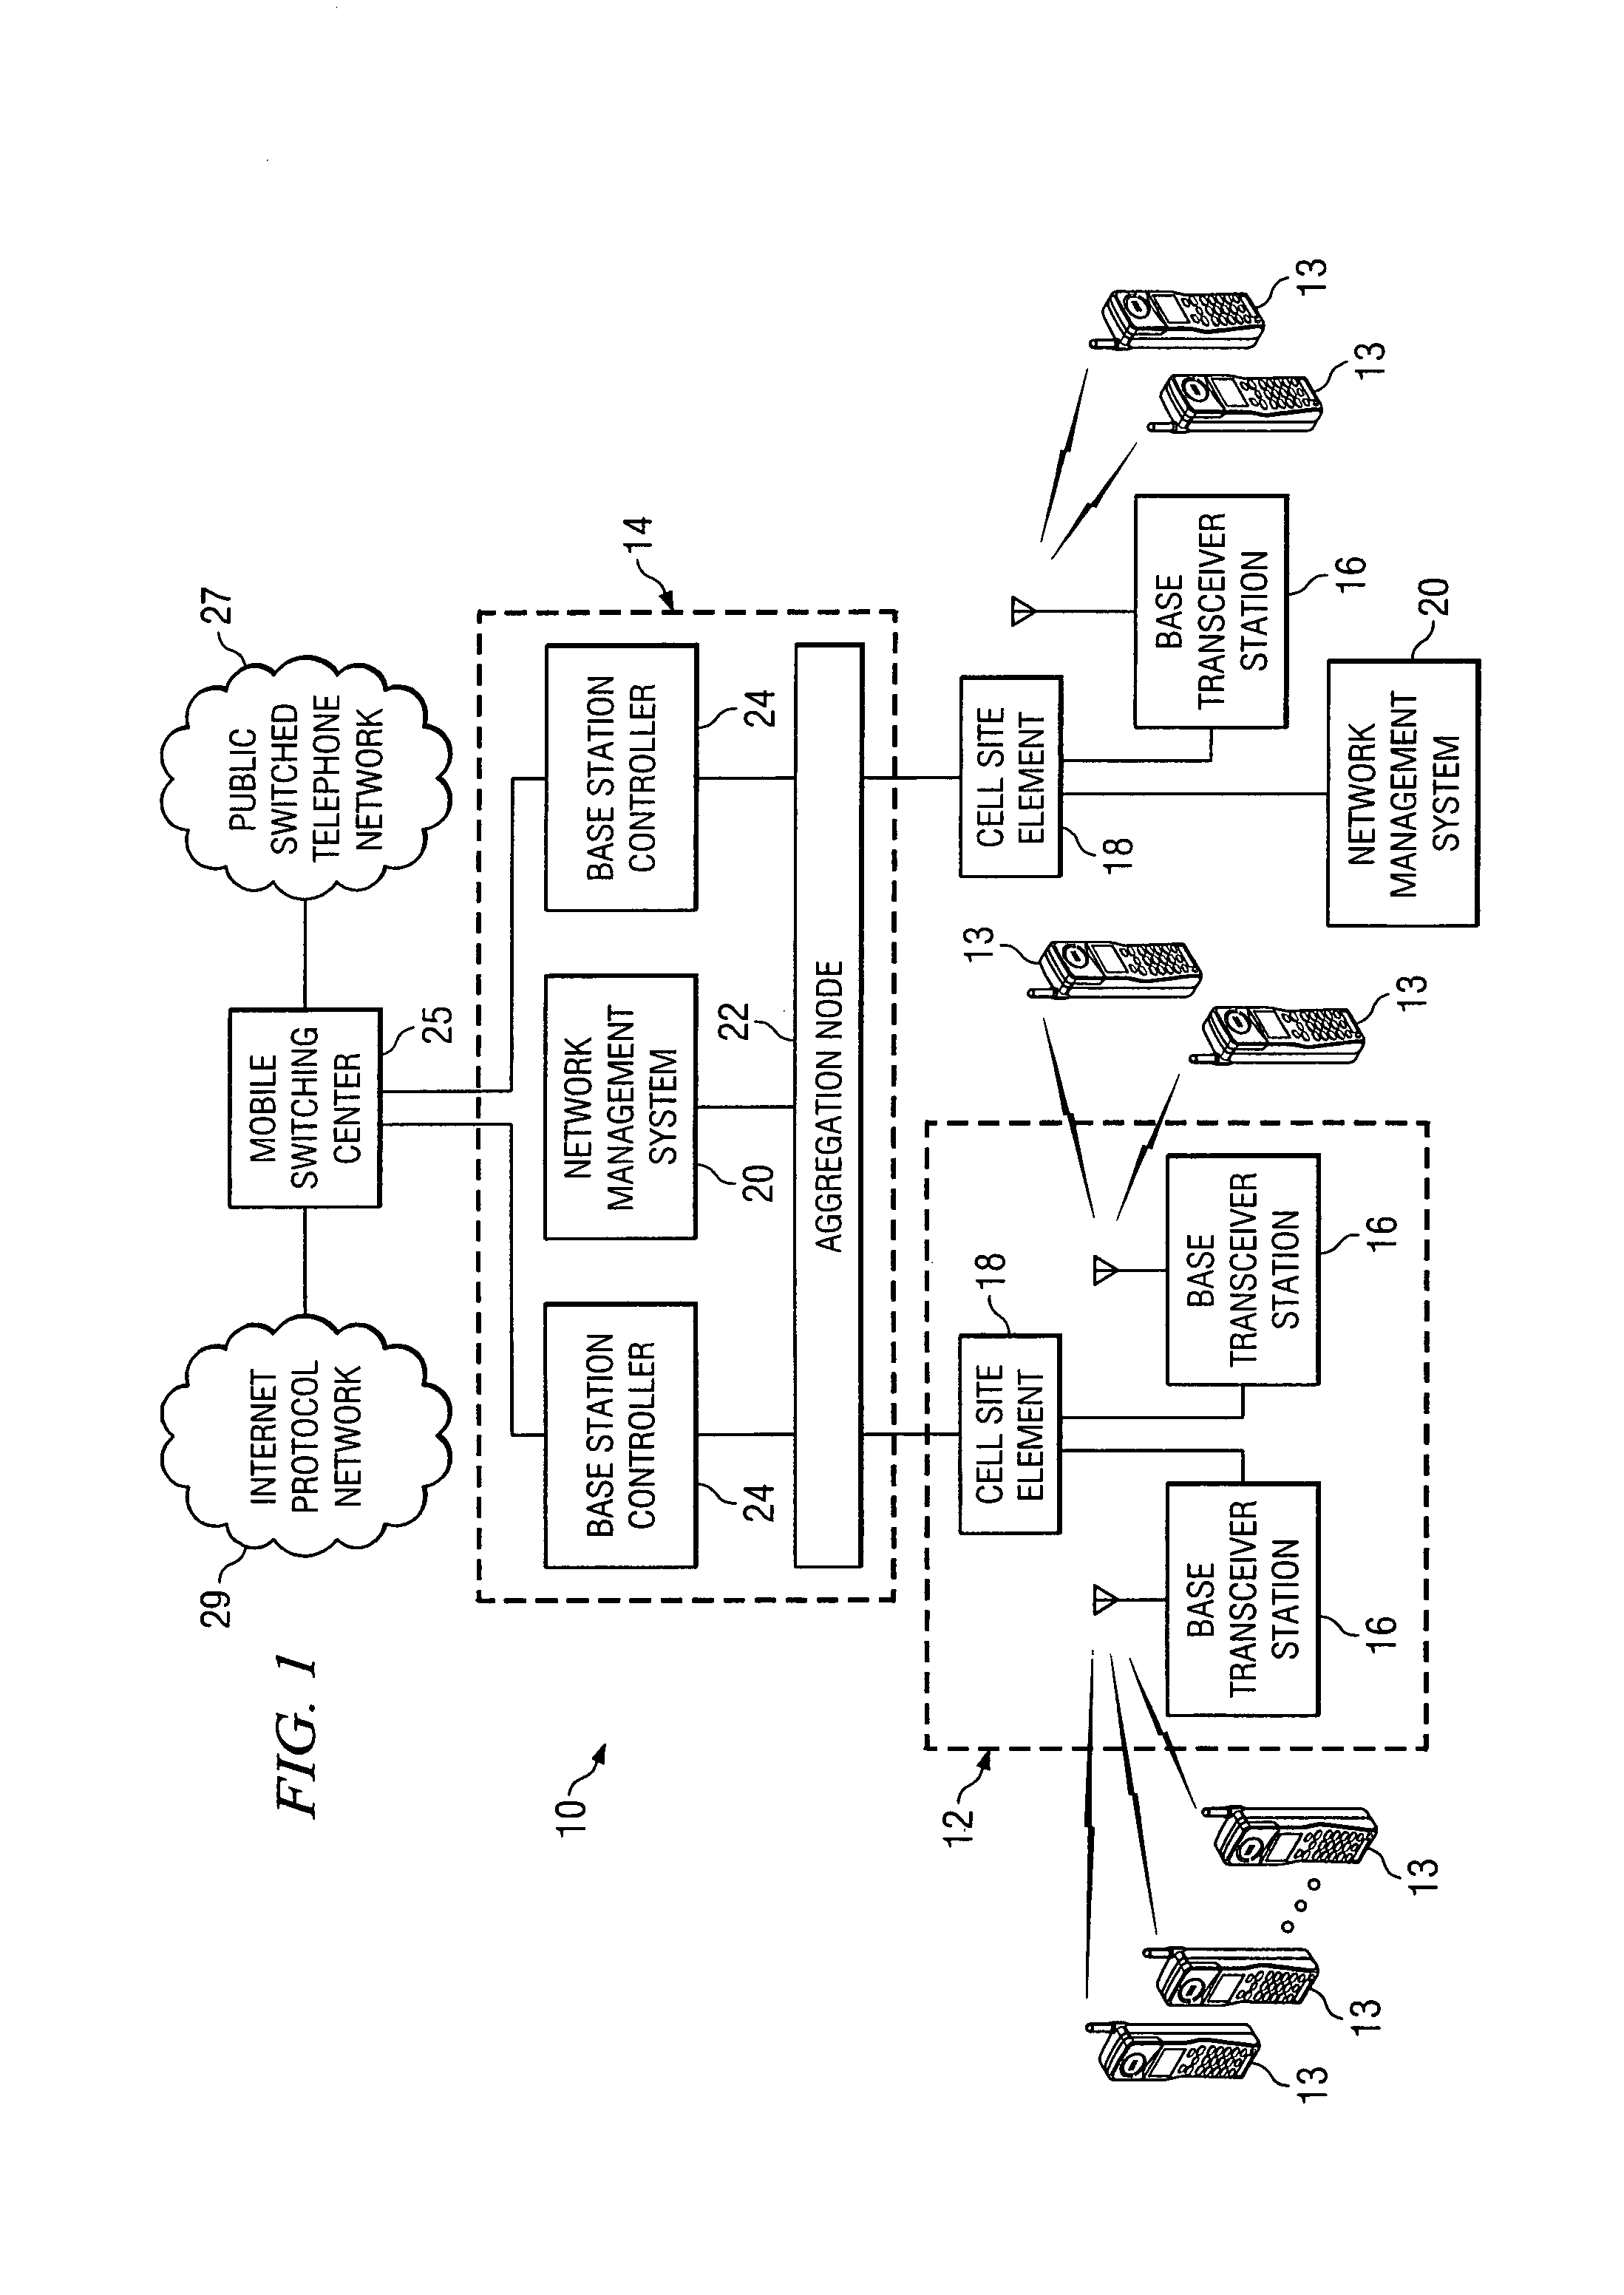 System and method for compressing communication flows in a network environment